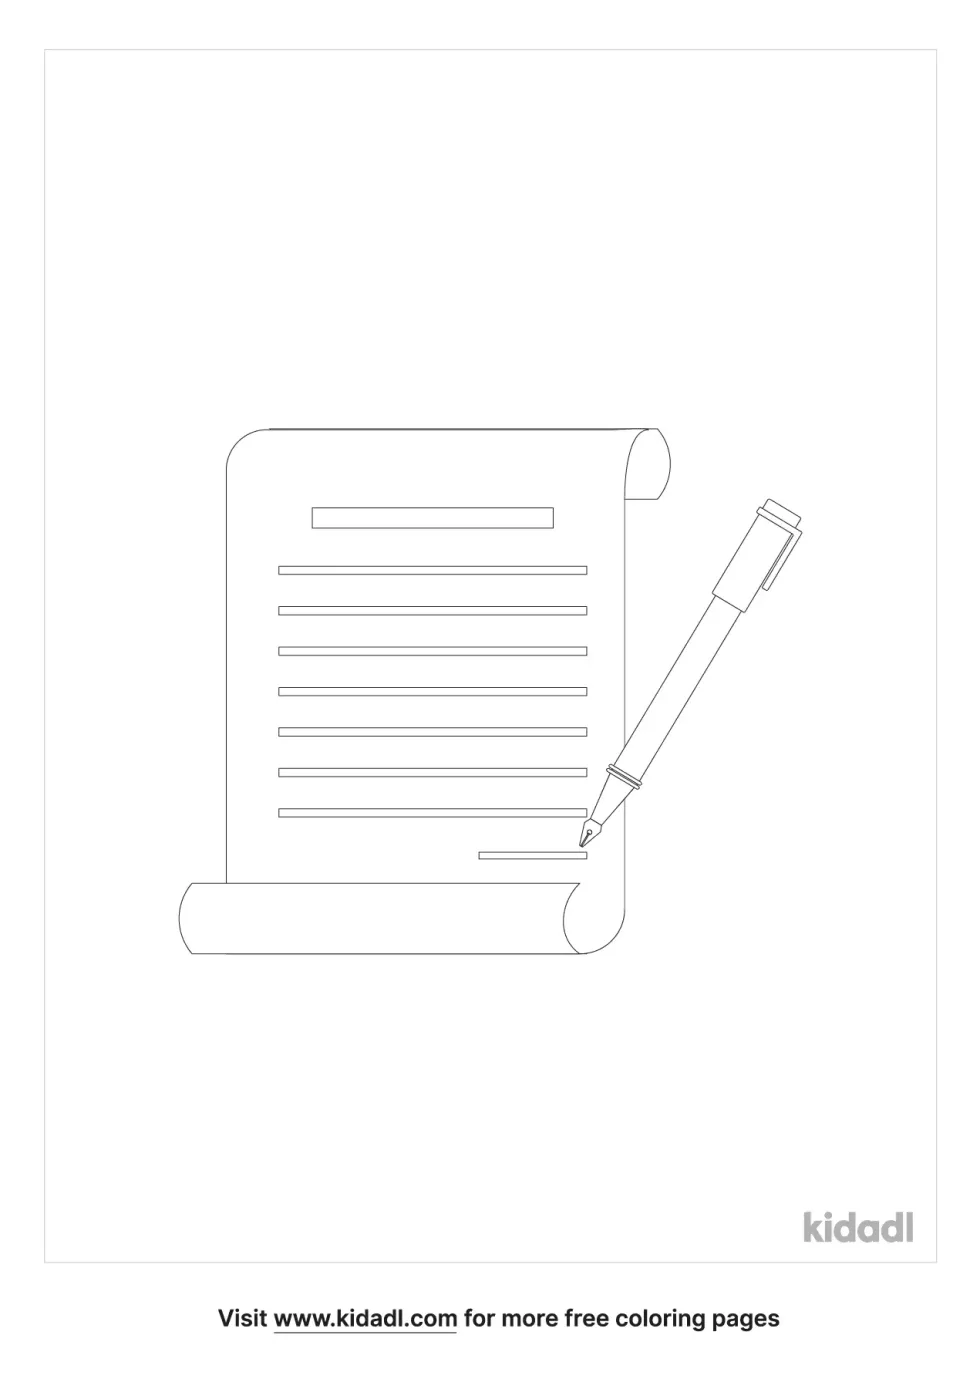 Document Coloring Page